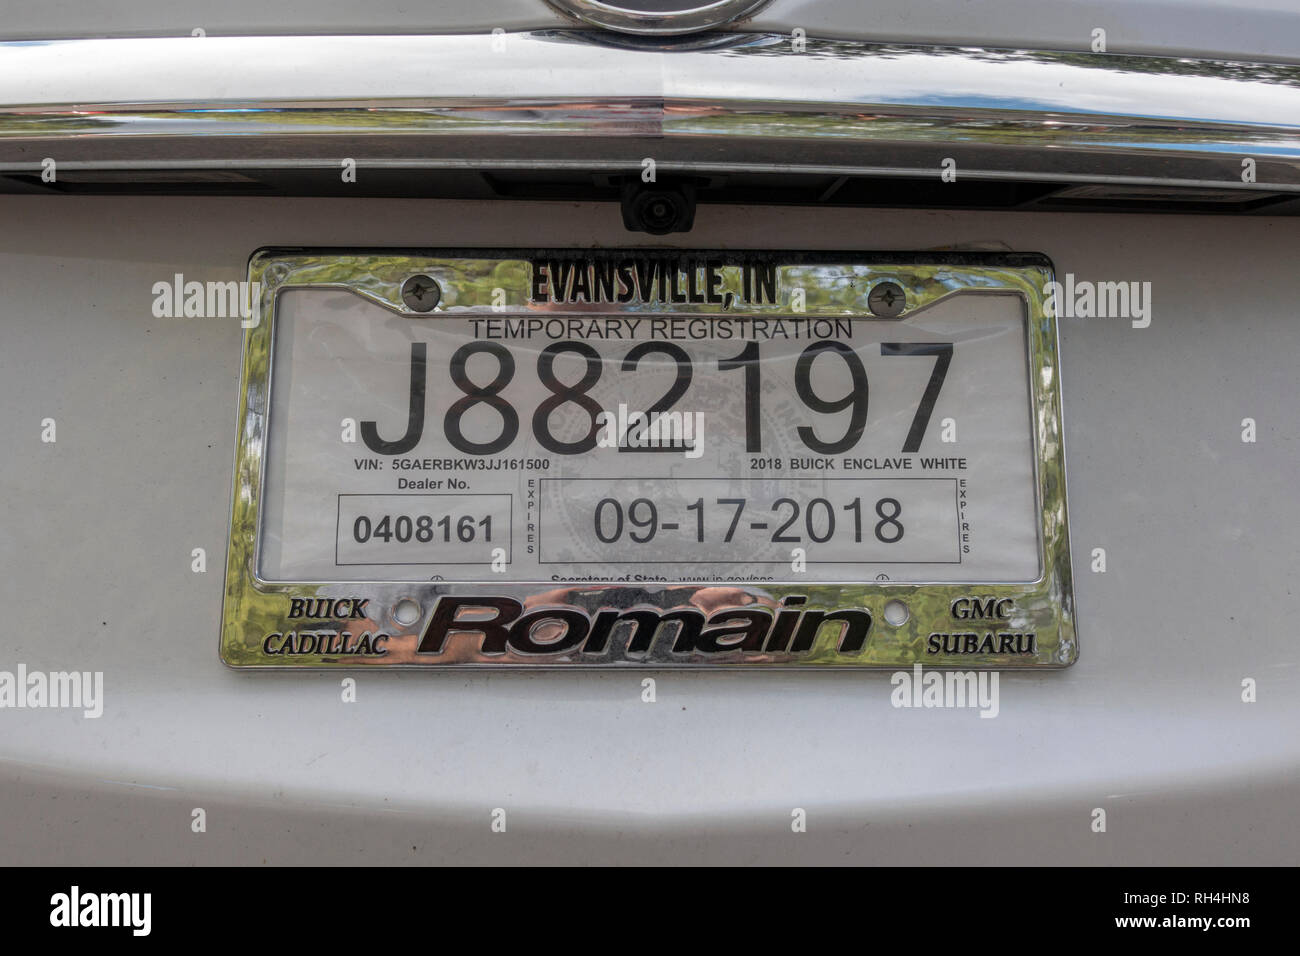 how-long-do-temporary-license-plates-last-the-temporary-tags-should